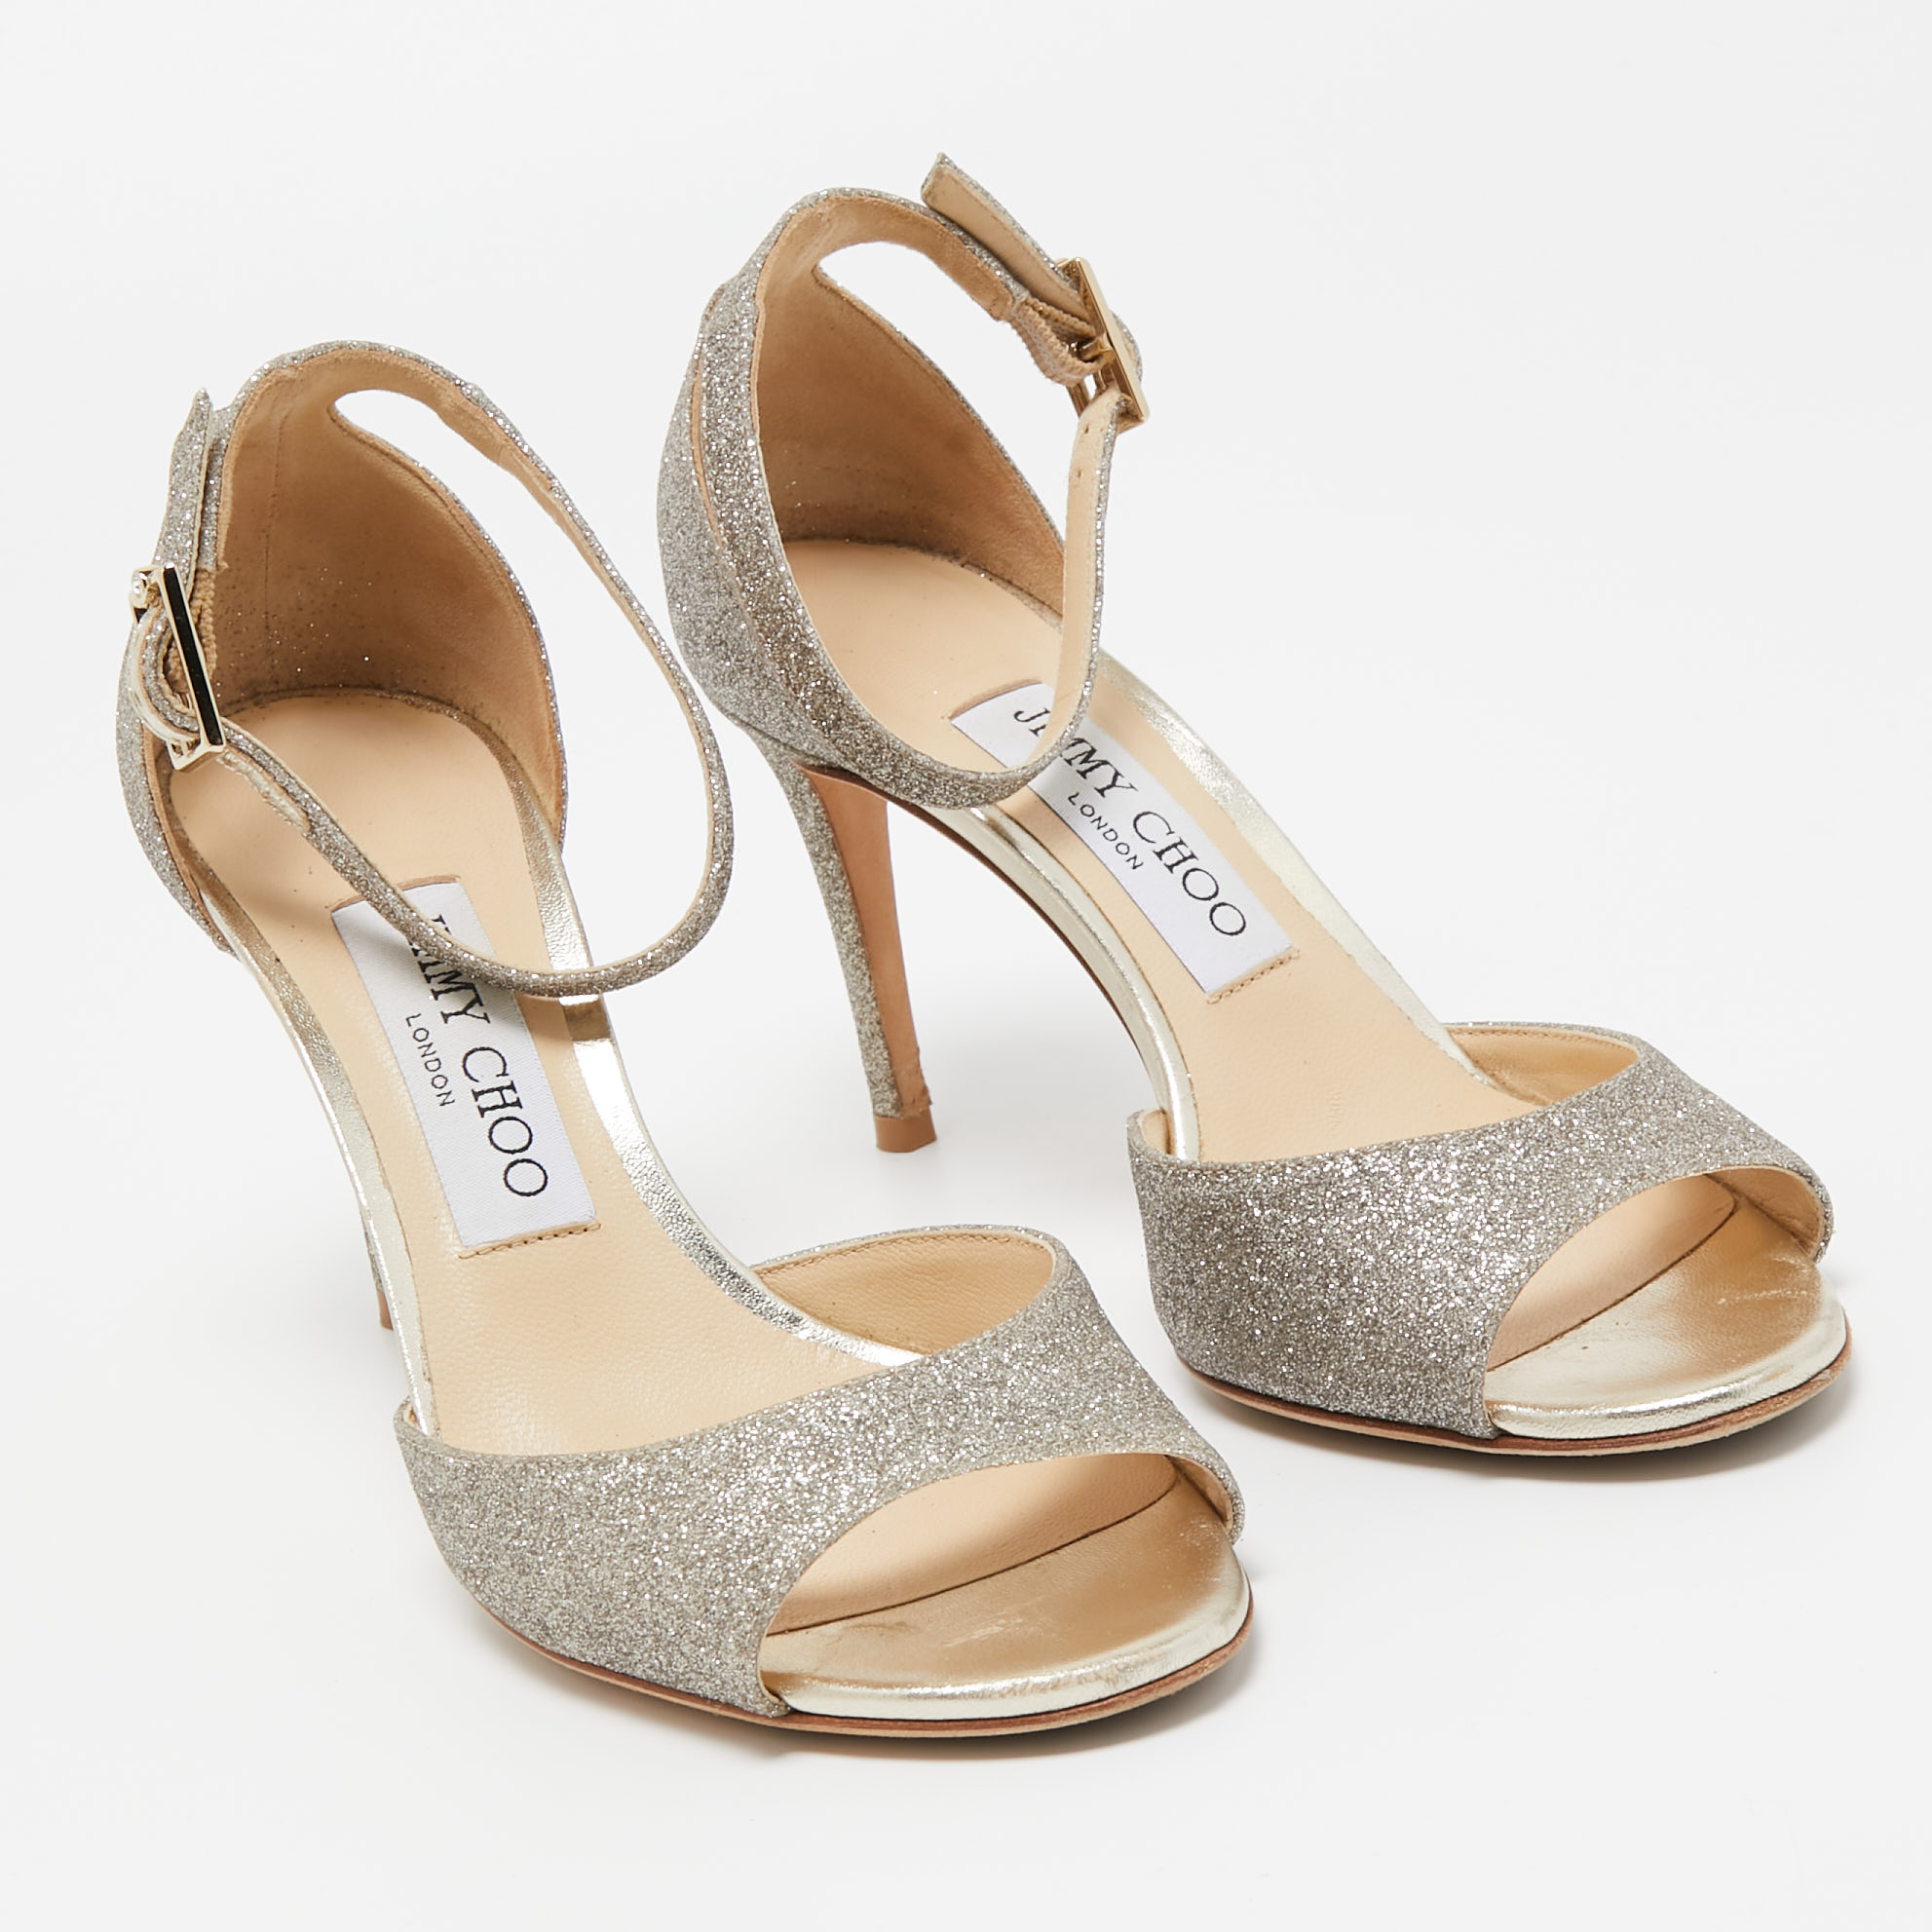 Jimmy Choo Gold Glitter Annie Ankle Strap Sandals Size 35.5